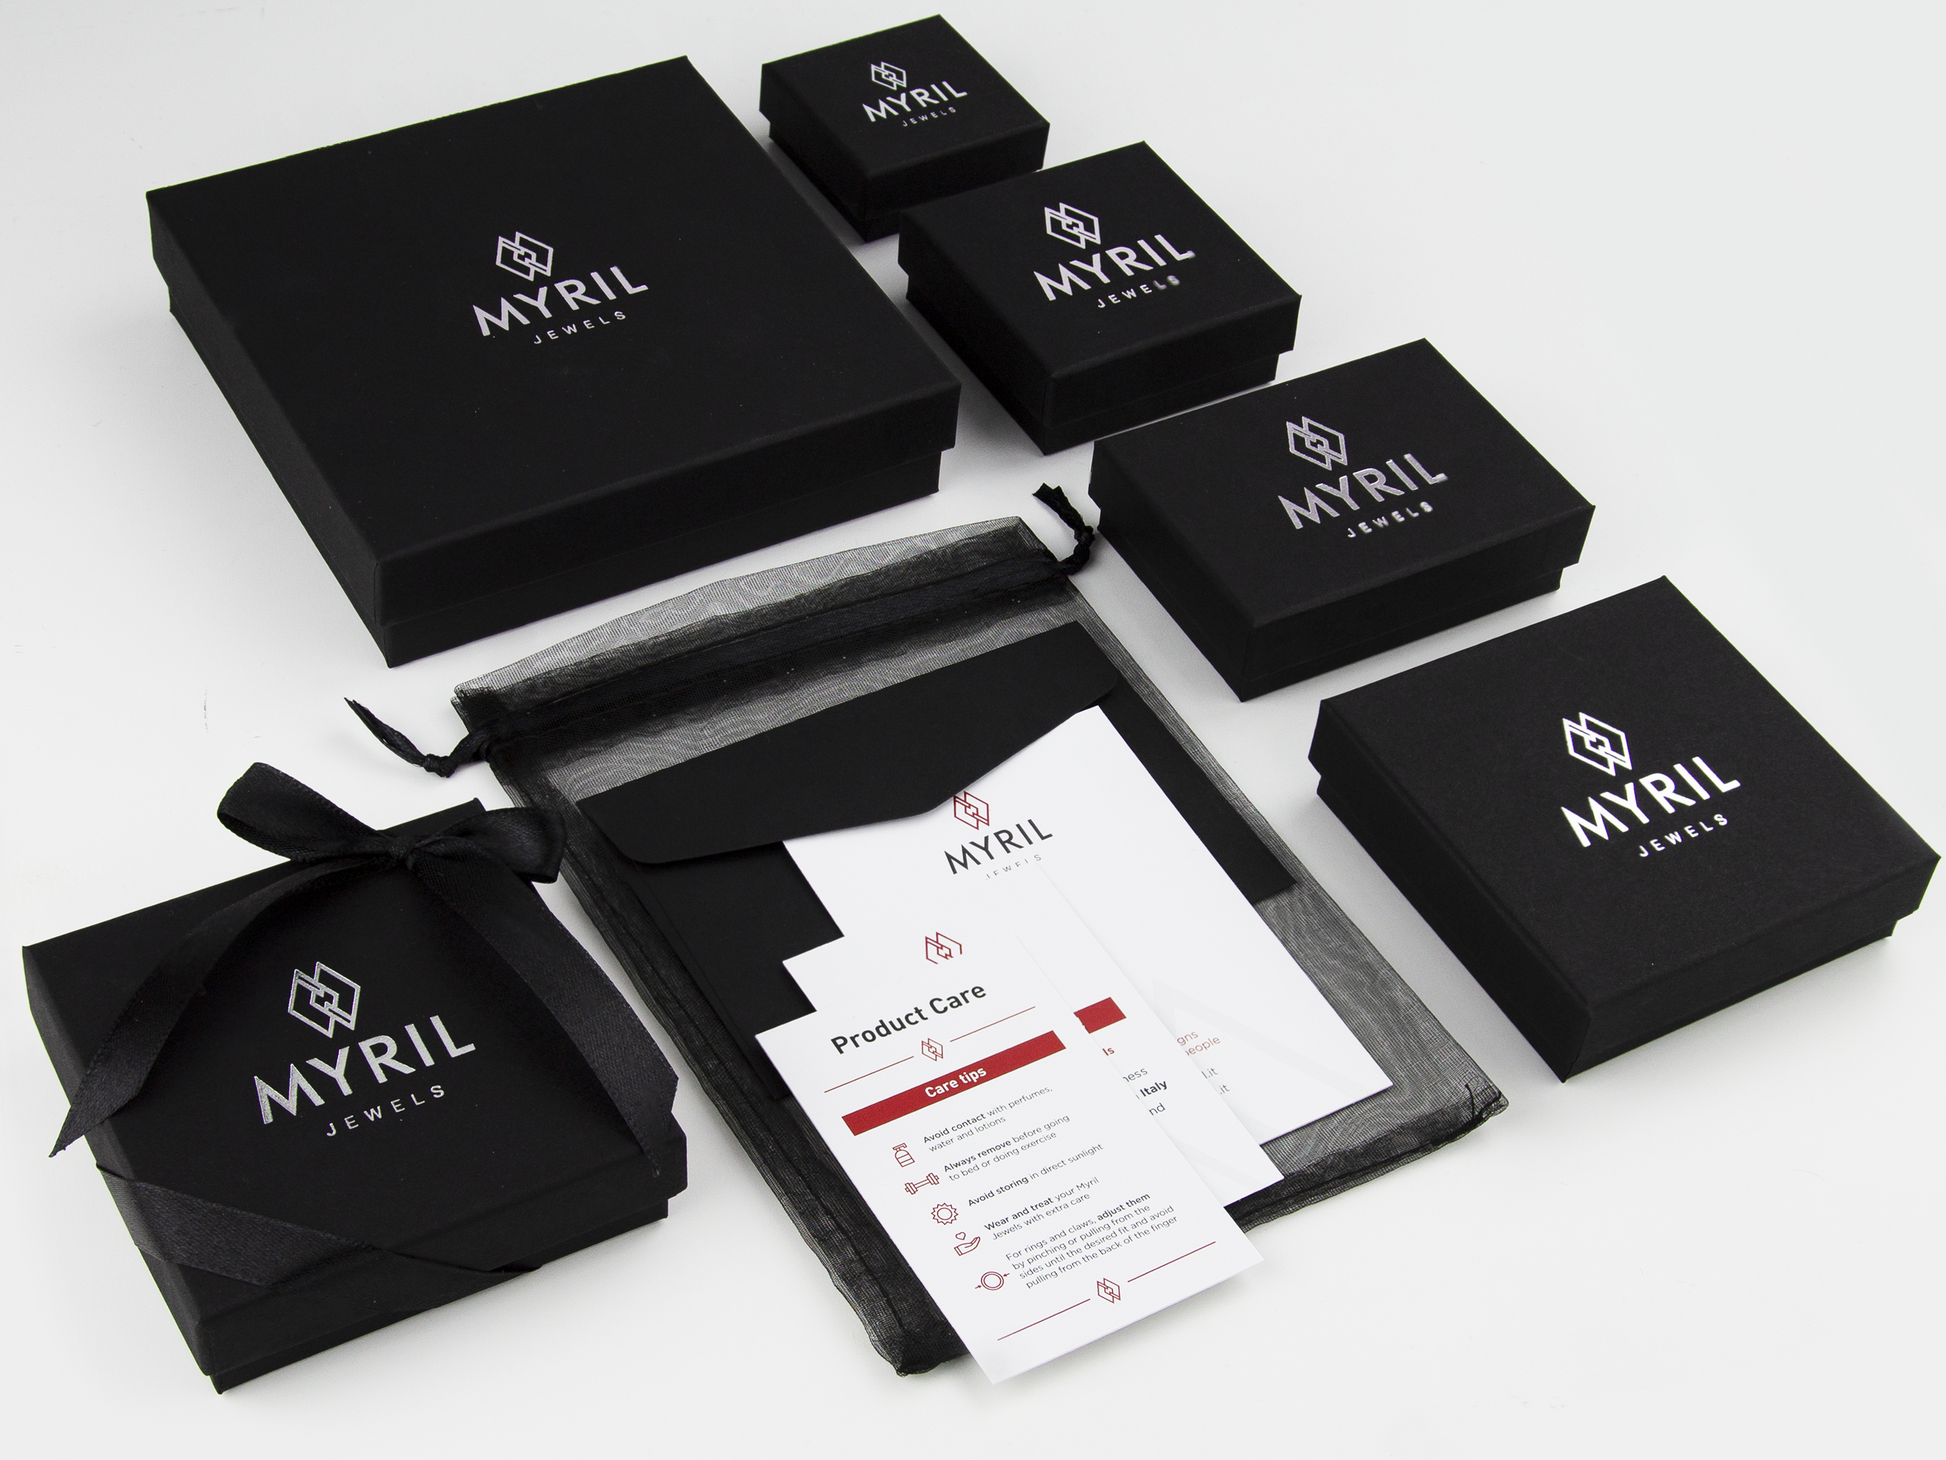 An assortment of Myril Jewels' sophisticated packaging is displayed, featuring elegant black boxes of various sizes, all adorned with the brand's distinctive logo. The collection includes sleek pouches and a product care card, each piece reflecting the neo-goth elegance and dark-avantgarde essence that Myril Jewels embodies. This presentation captures the brand's commitment to gothic-chic style and quality, appealing to lovers of Halloween jewelry, punk accessories, and festival wear